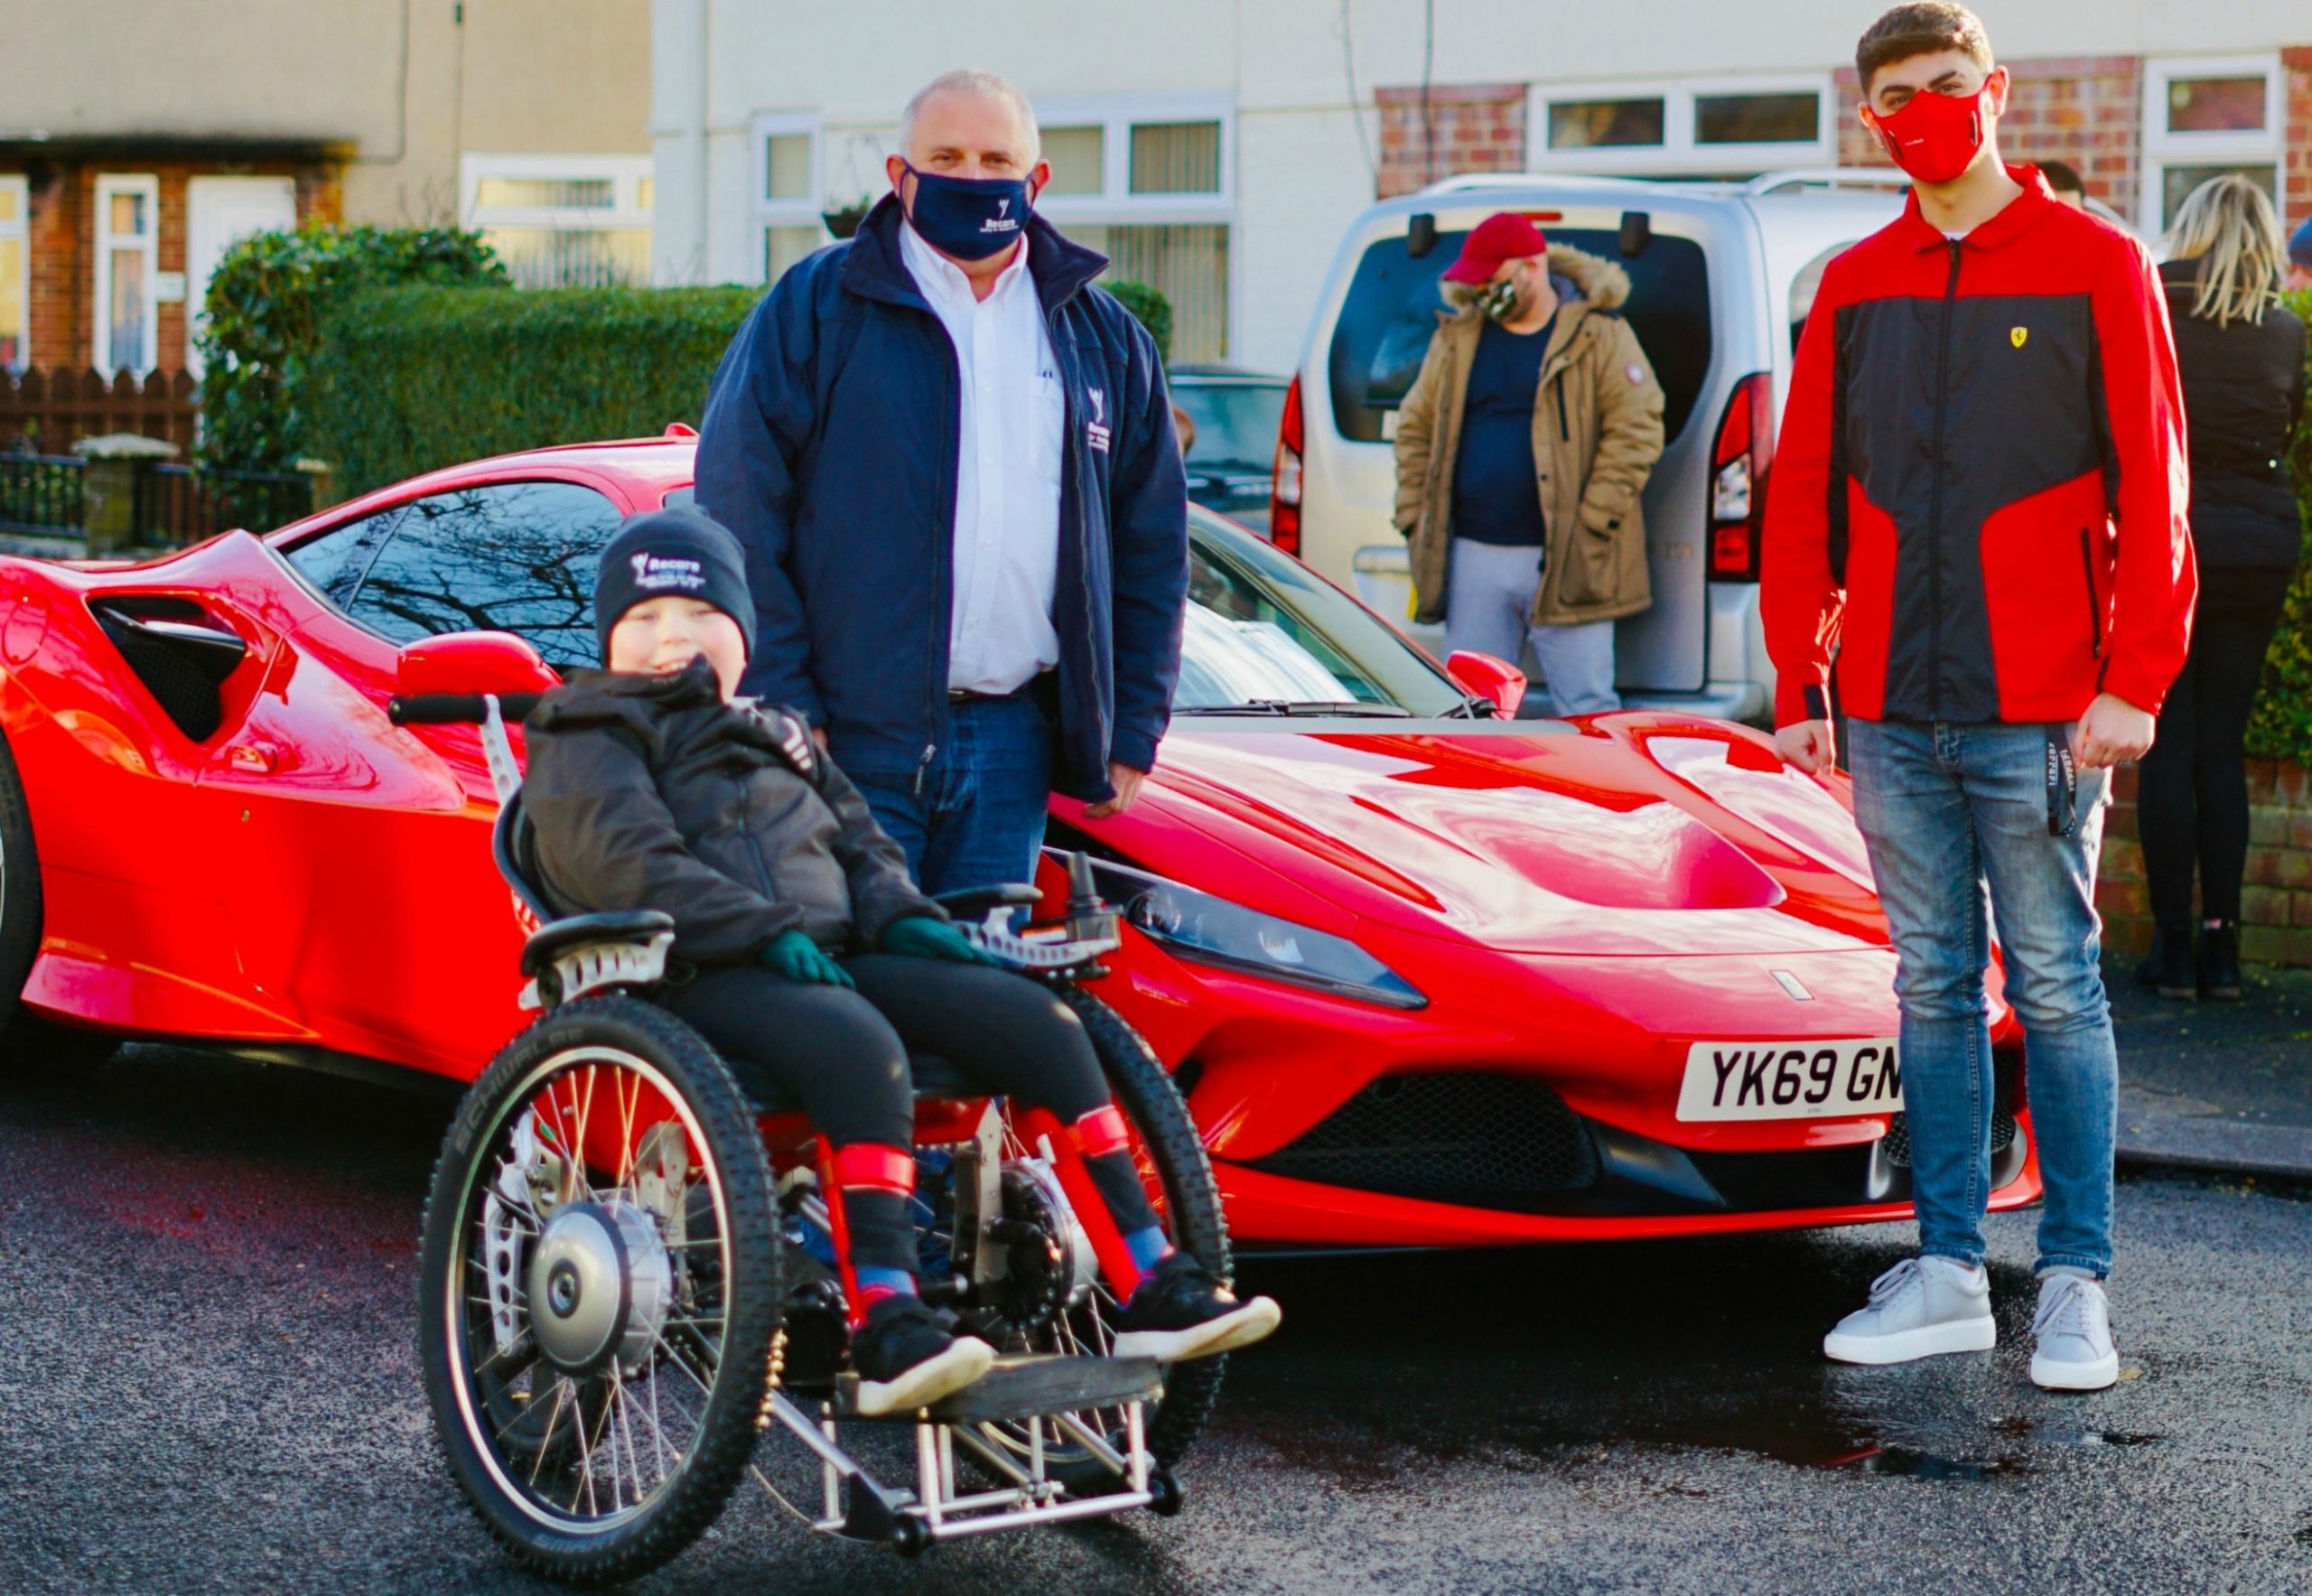 Recare and JCT600 Brooklands – Ferrari Delivers Life Changing F1-inspired Powered Wheelchair to Darlington’s Disabled Robbie